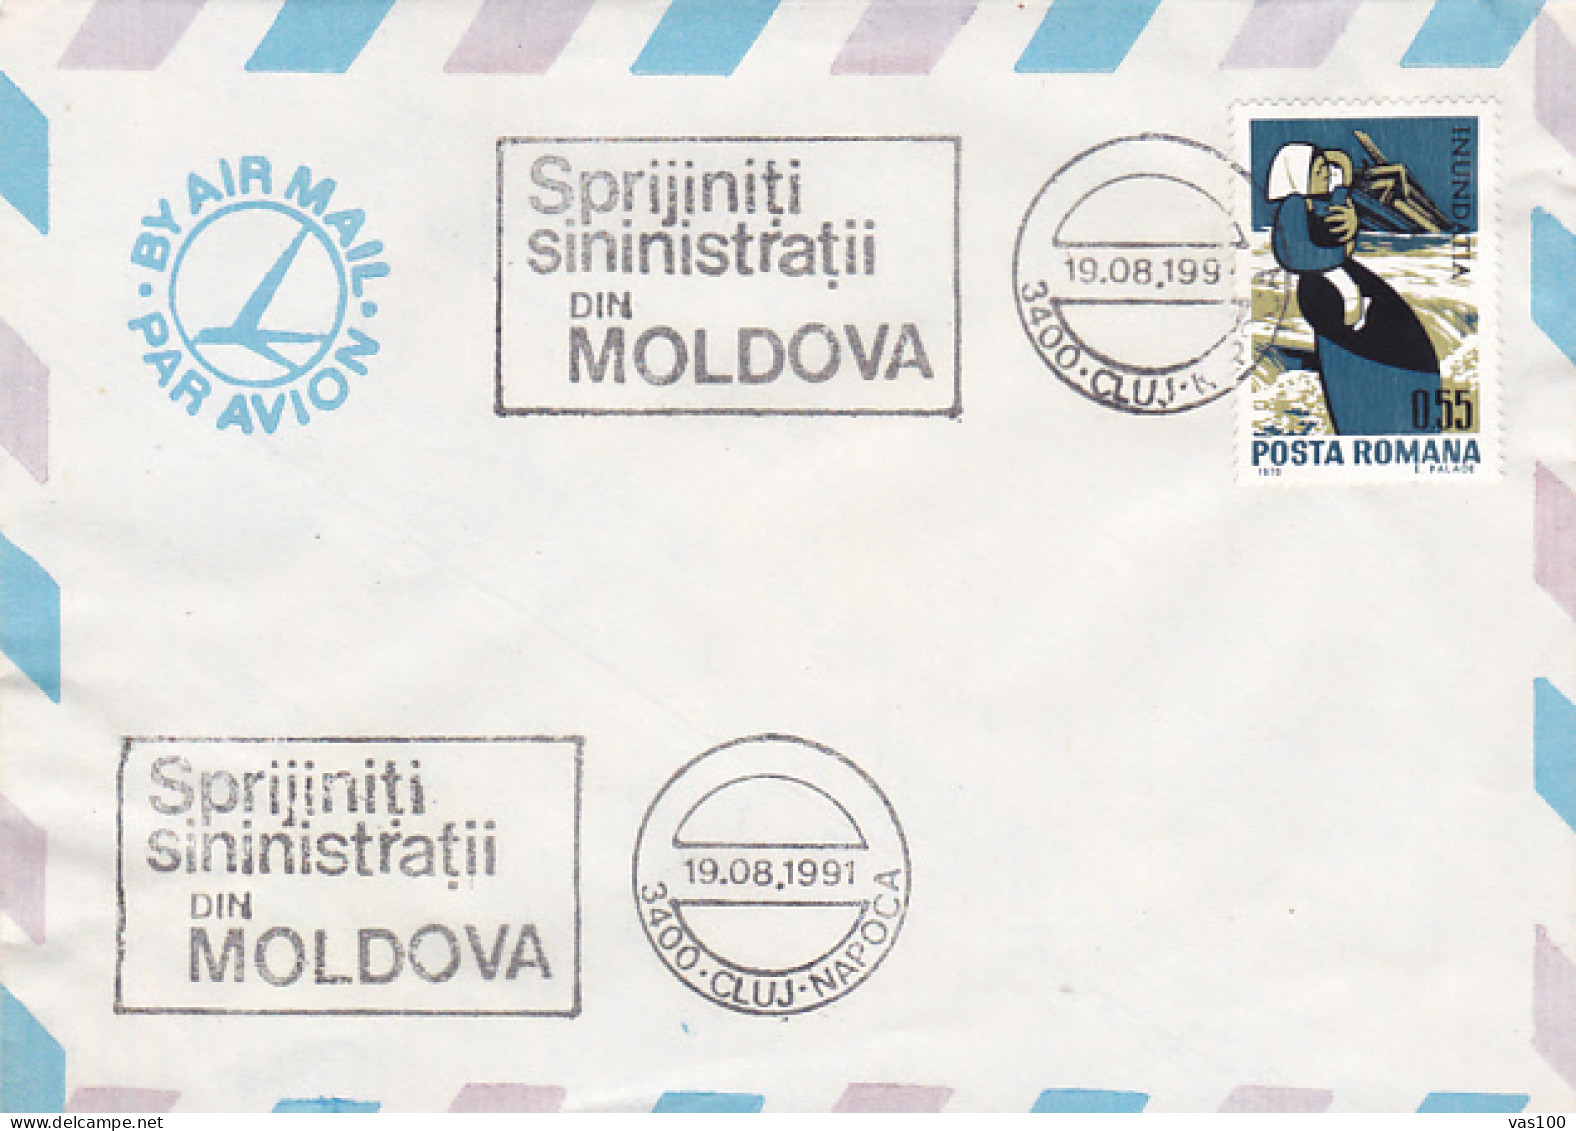 HELS FLOOD VICTIMS CAMPAIGN, SPECIAL POSTMARKS AND STAMP ON COVER, 1991, ROMANIA - Storia Postale